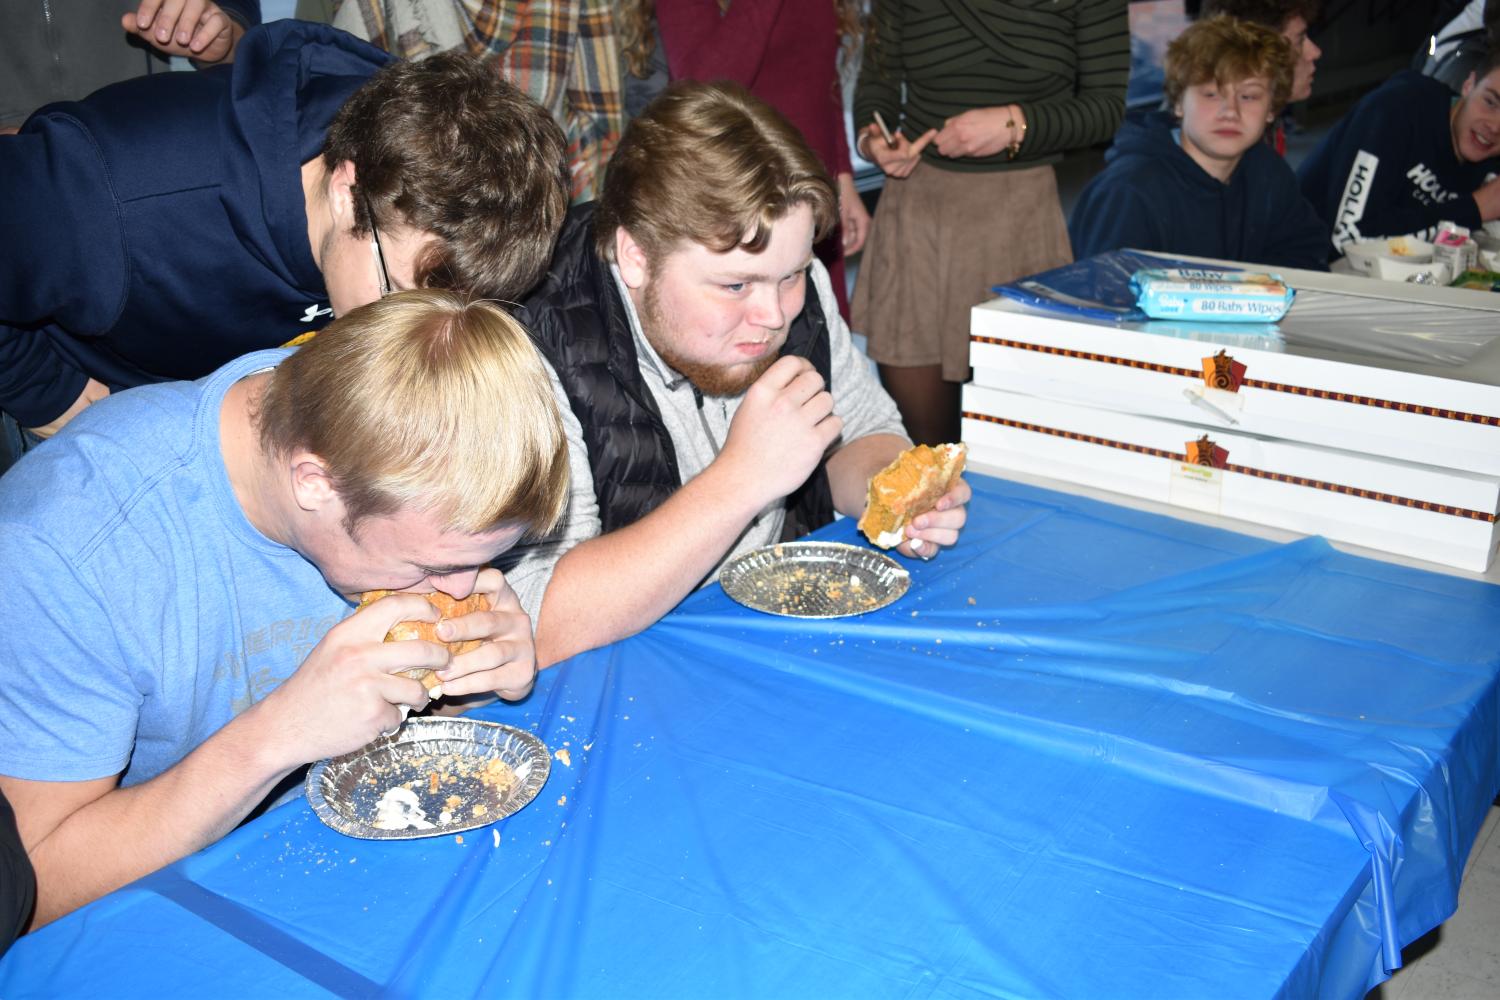 Seniors+Michael+Lajoie+and+Gunnar+Gronski+chow+down+on+whole+pumpkin+pies+during+pie+eating+contest+on+Nov.+21st.%0A